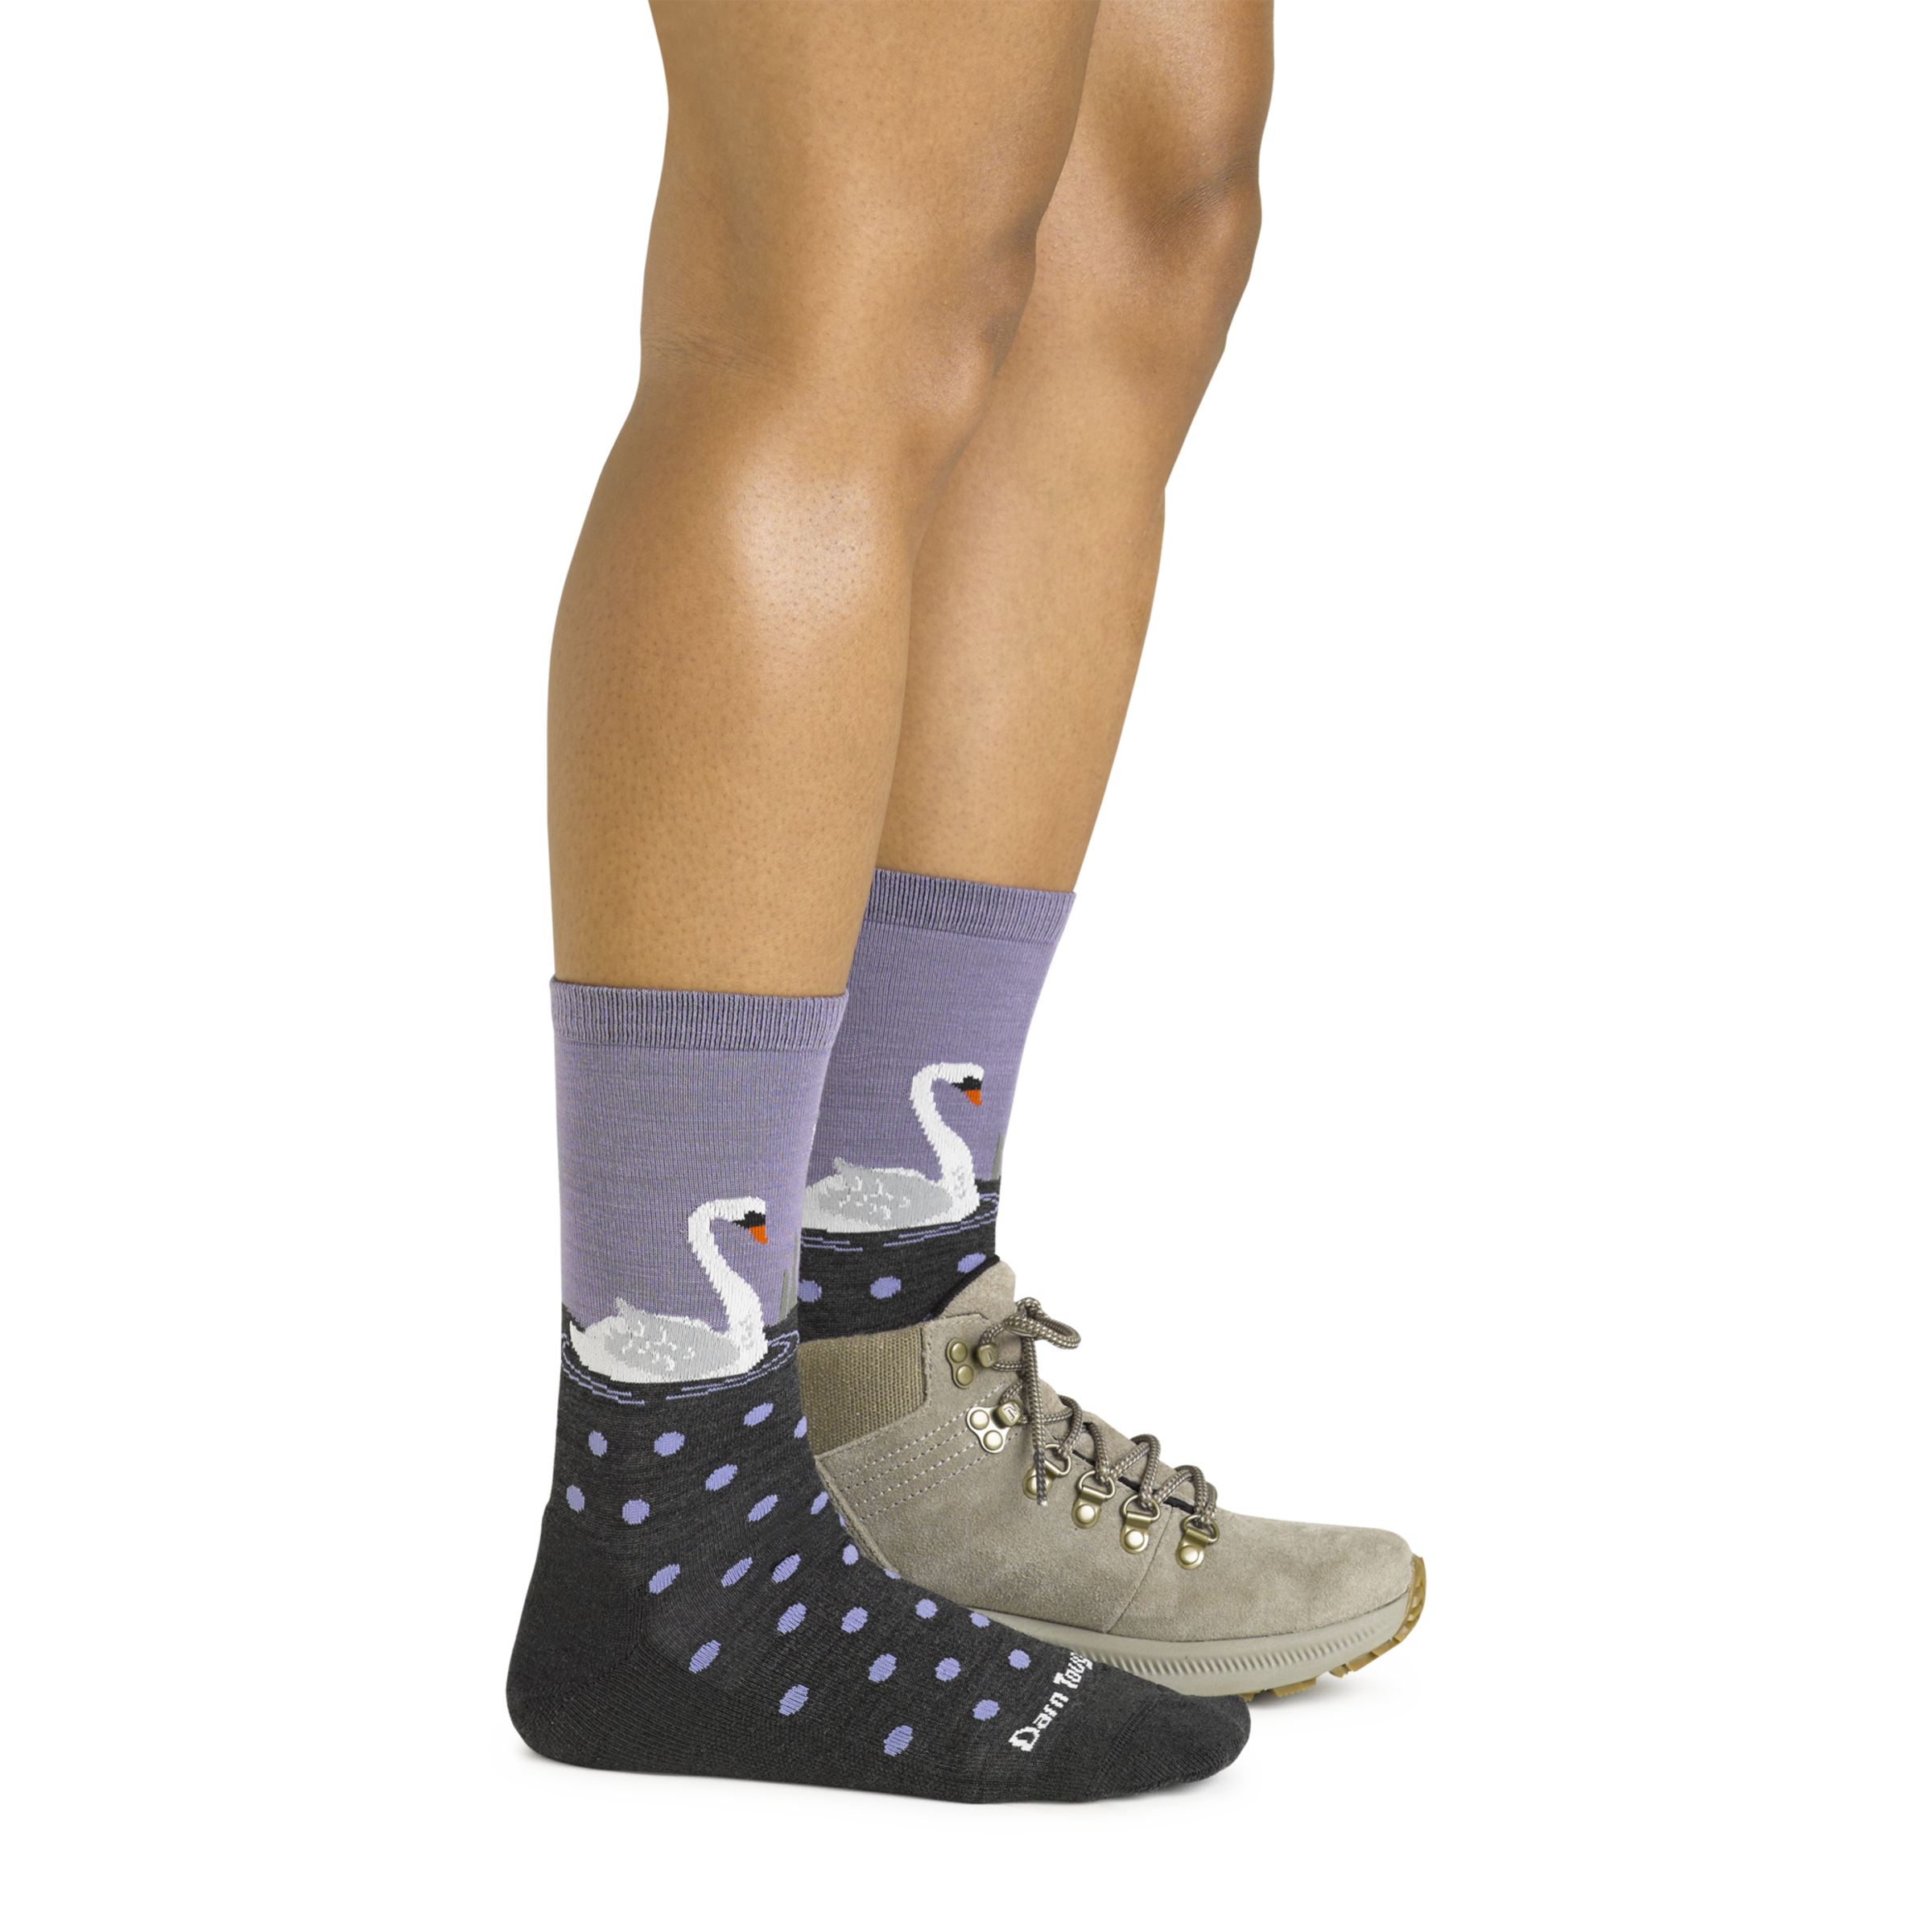 Side shot of model wearing the women's wild life crew lifestyle socks in charcoal with a gray boot on her left foot